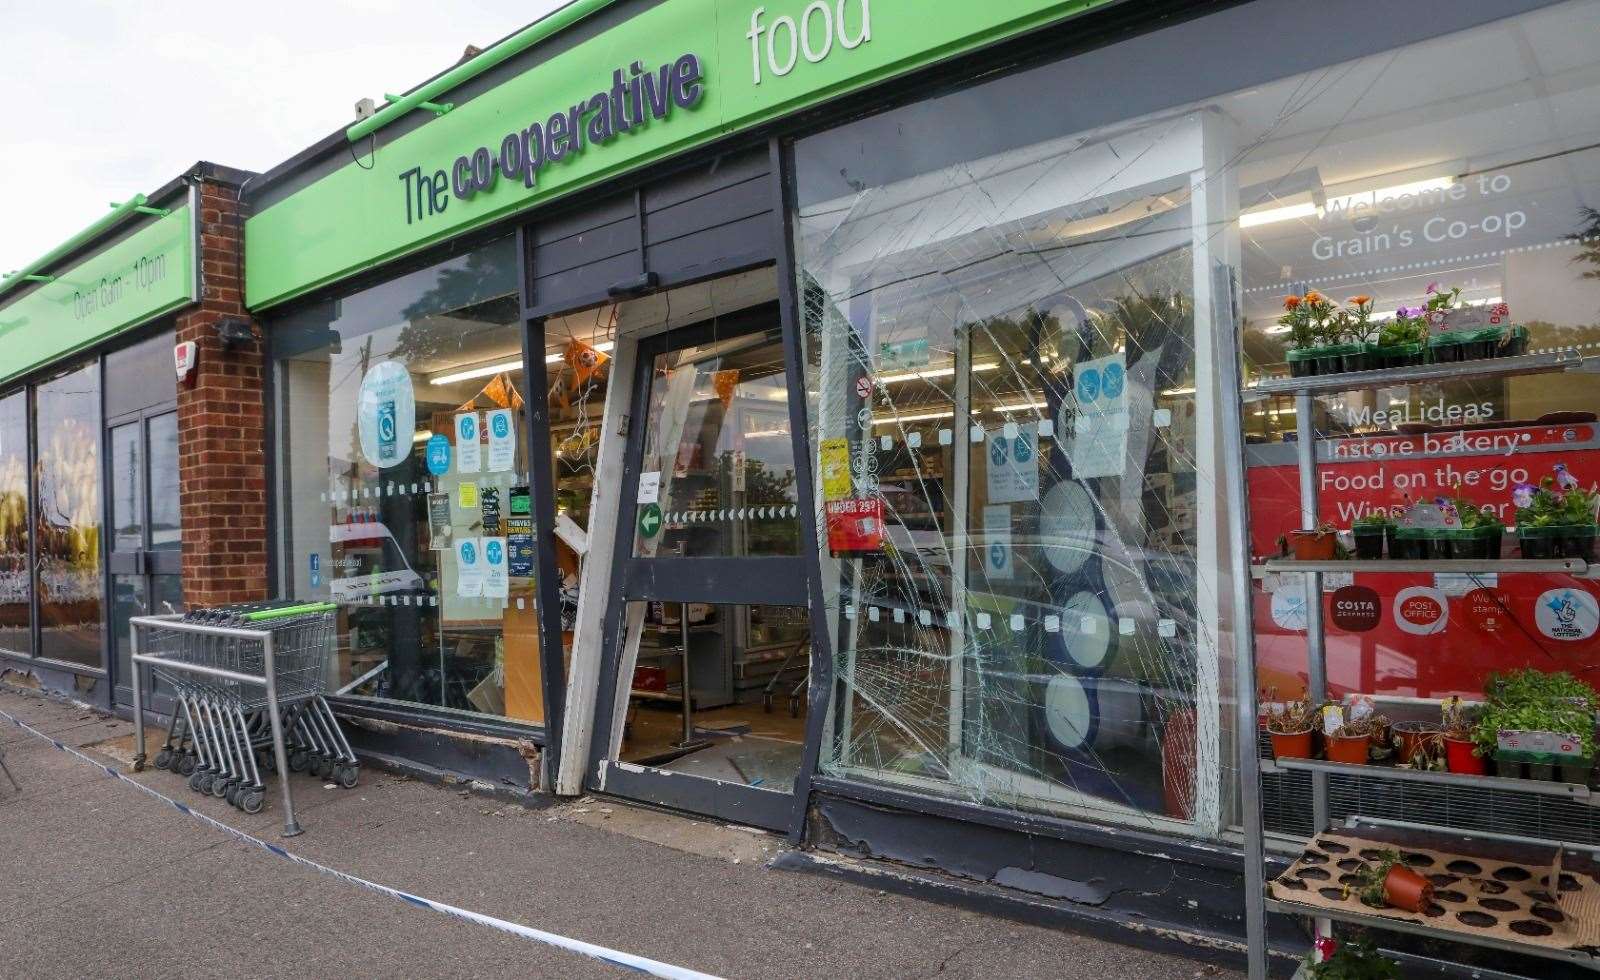 The Co-op on the Isle of Grain has been closed this morning while police carry out an investigation after the shop was ram-raided by thieves overnight. Picture: UKNIP